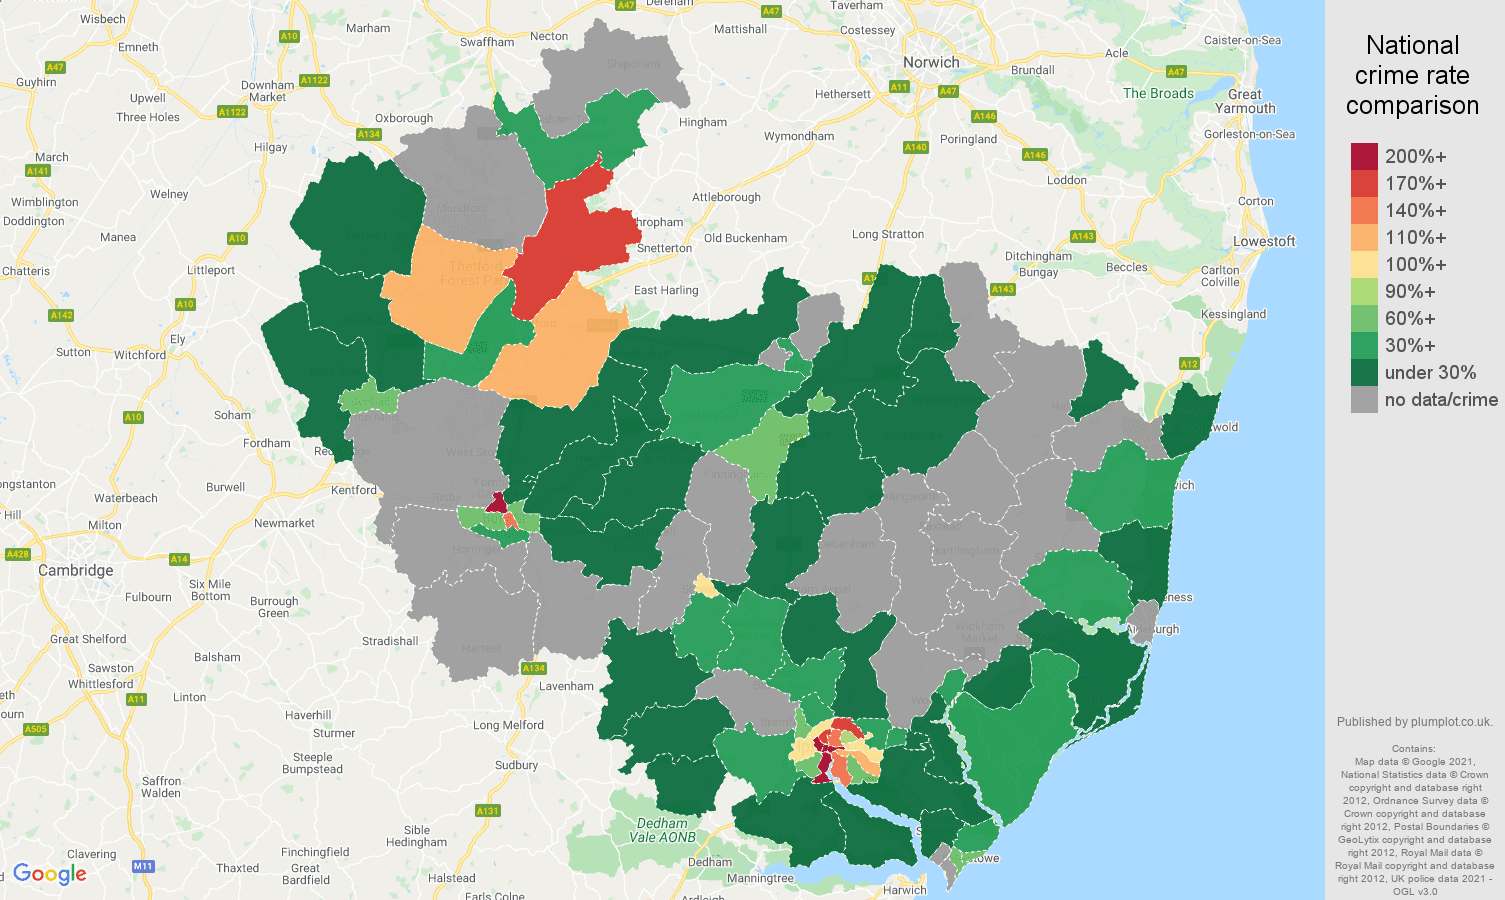 Ipswich bicycle theft crime rate comparison map